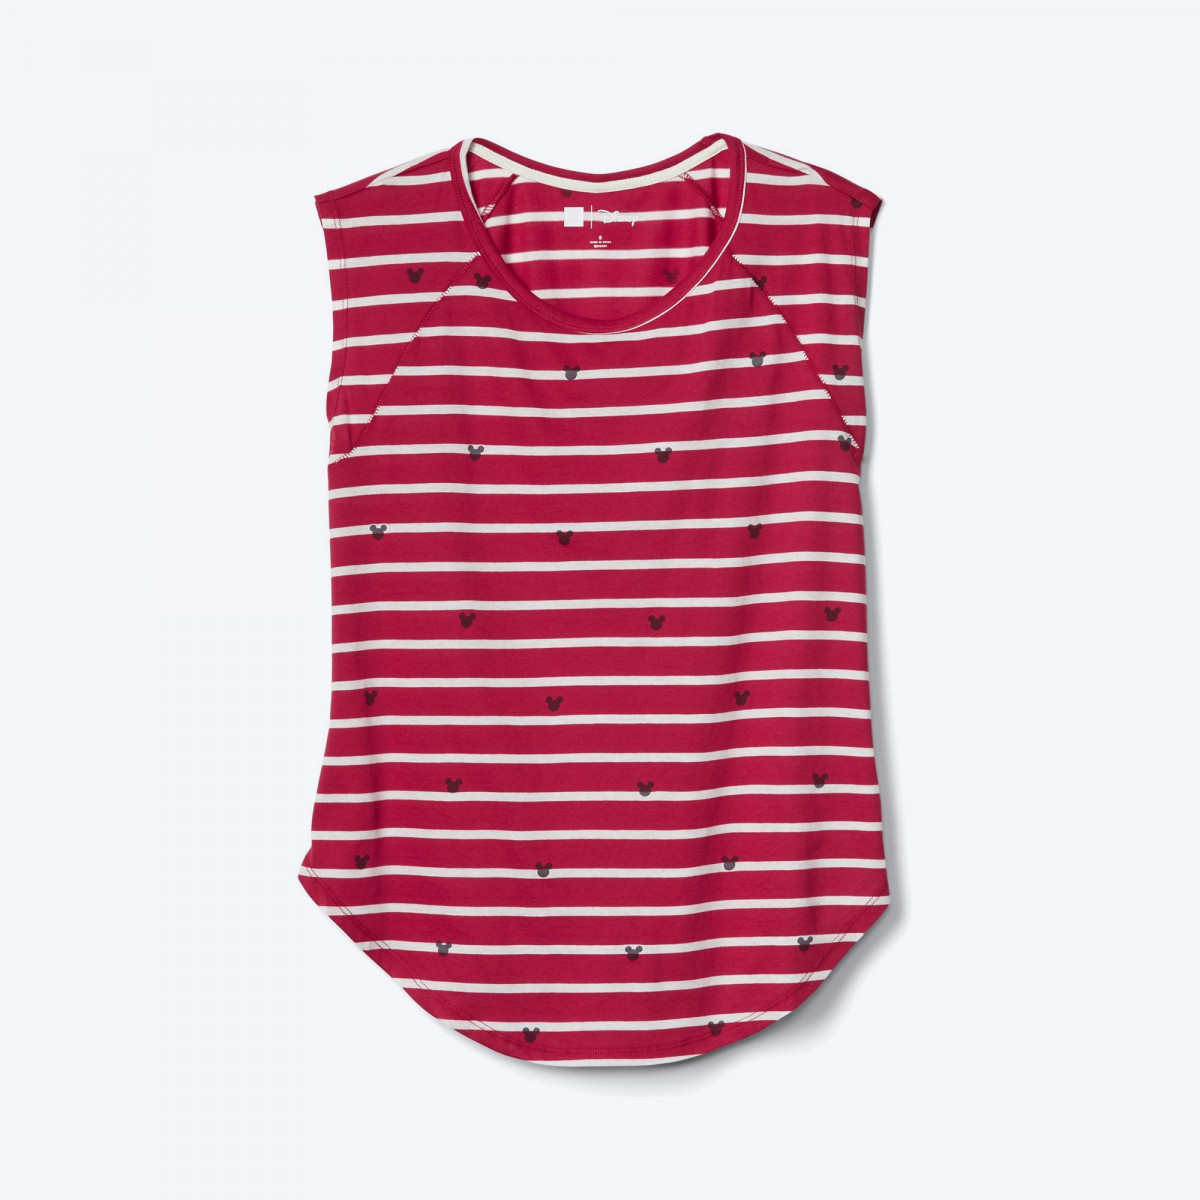 Gap Disney Mickey Mouse and stripes tee